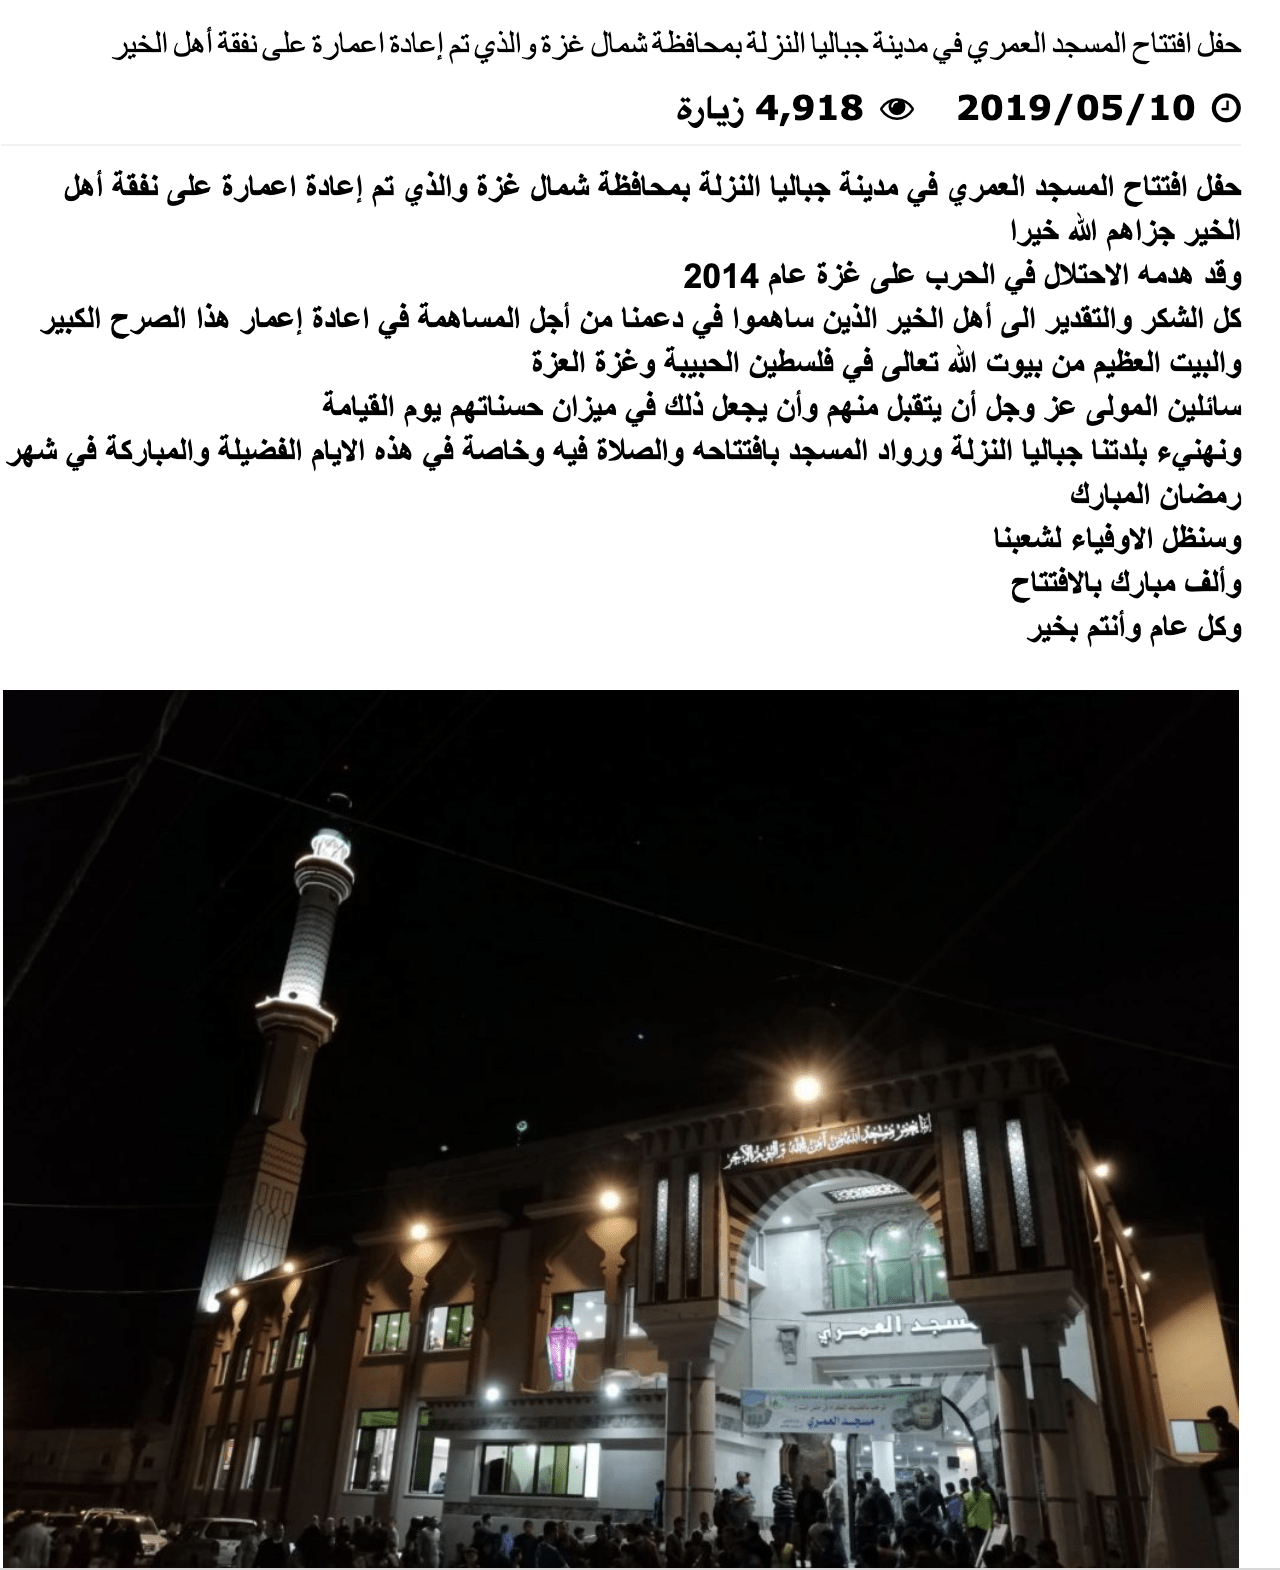 A screenshot from an article documenting the official reopening of the Al-Omari mosque in 2019.